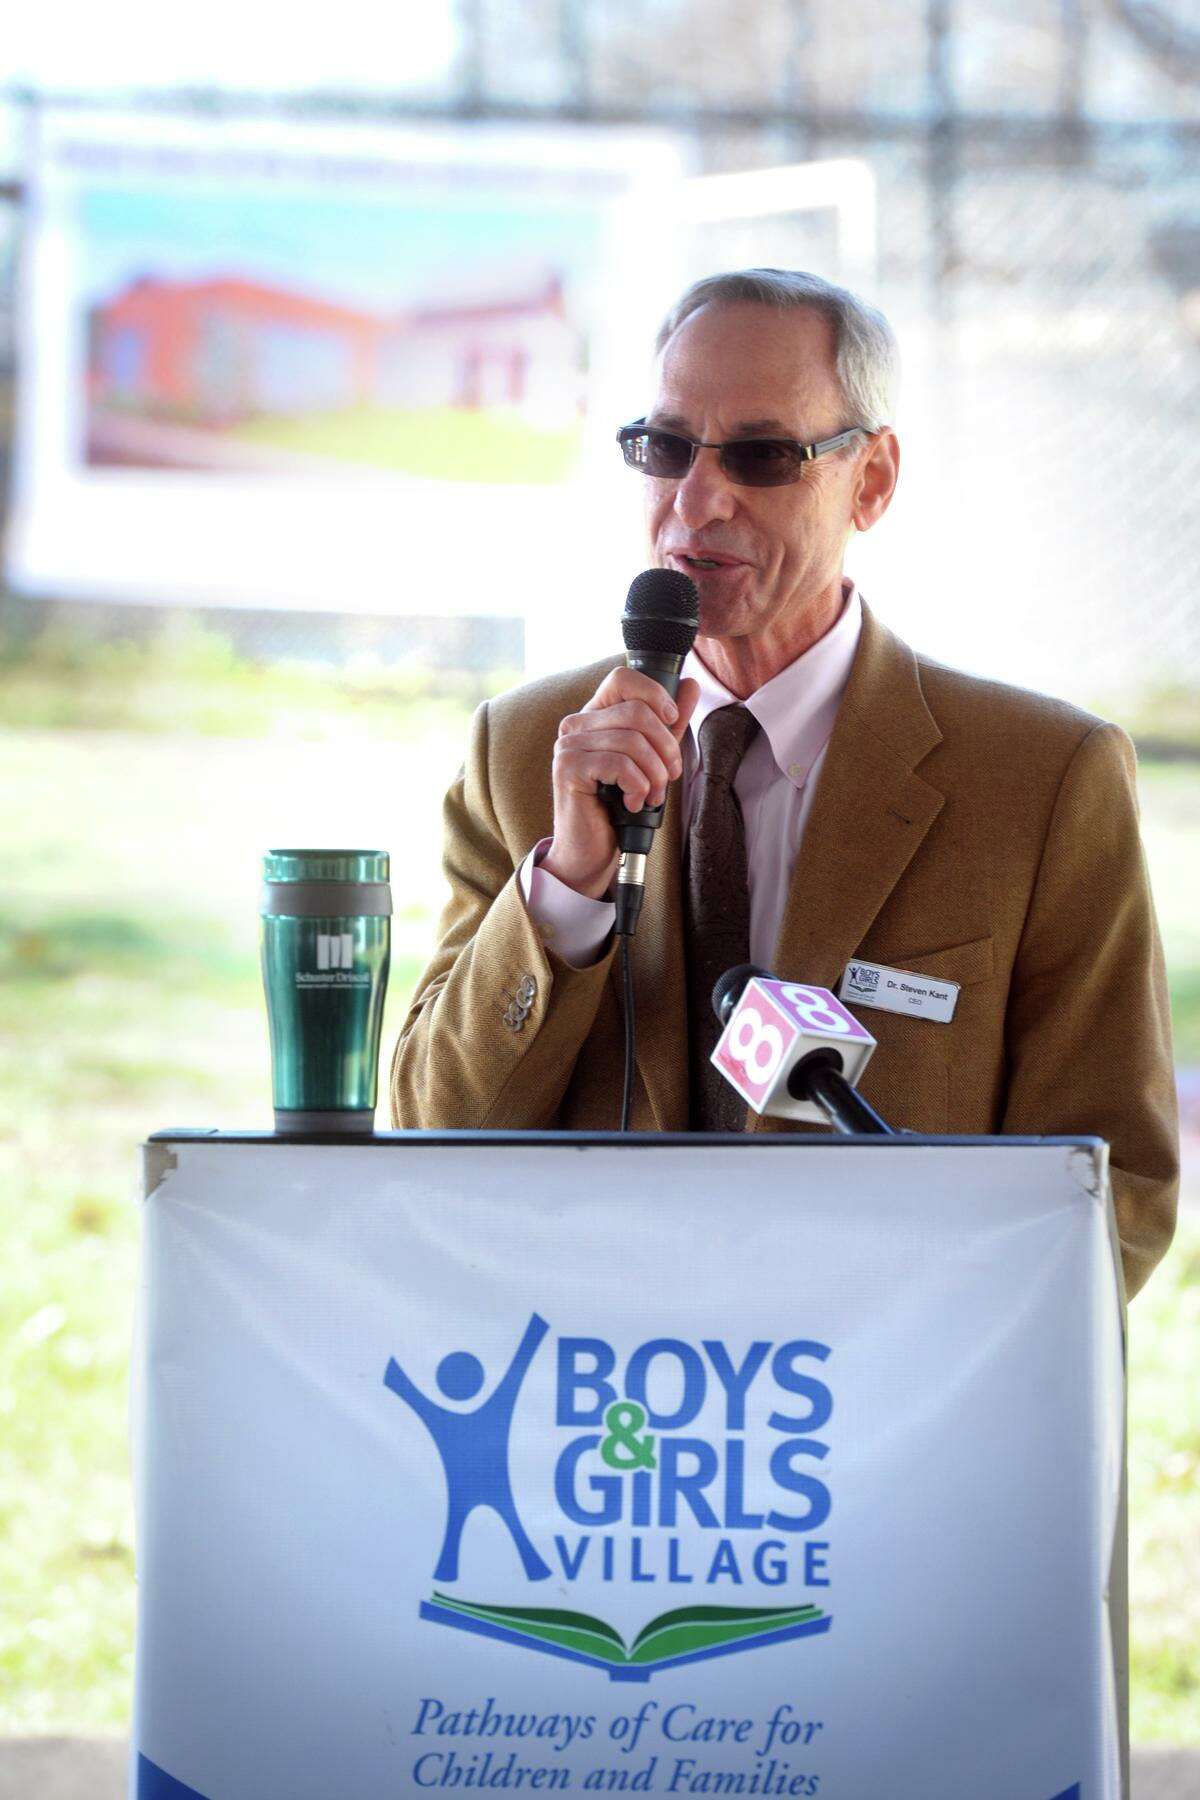 Dr. Steven Kant, chief medical officer of Boys & Girls Village, speaks during a groundbreaking ceremony for a new Life Skills and Vocational Training Facility on the Milford, Conn. campus Nov. 15, 2019.